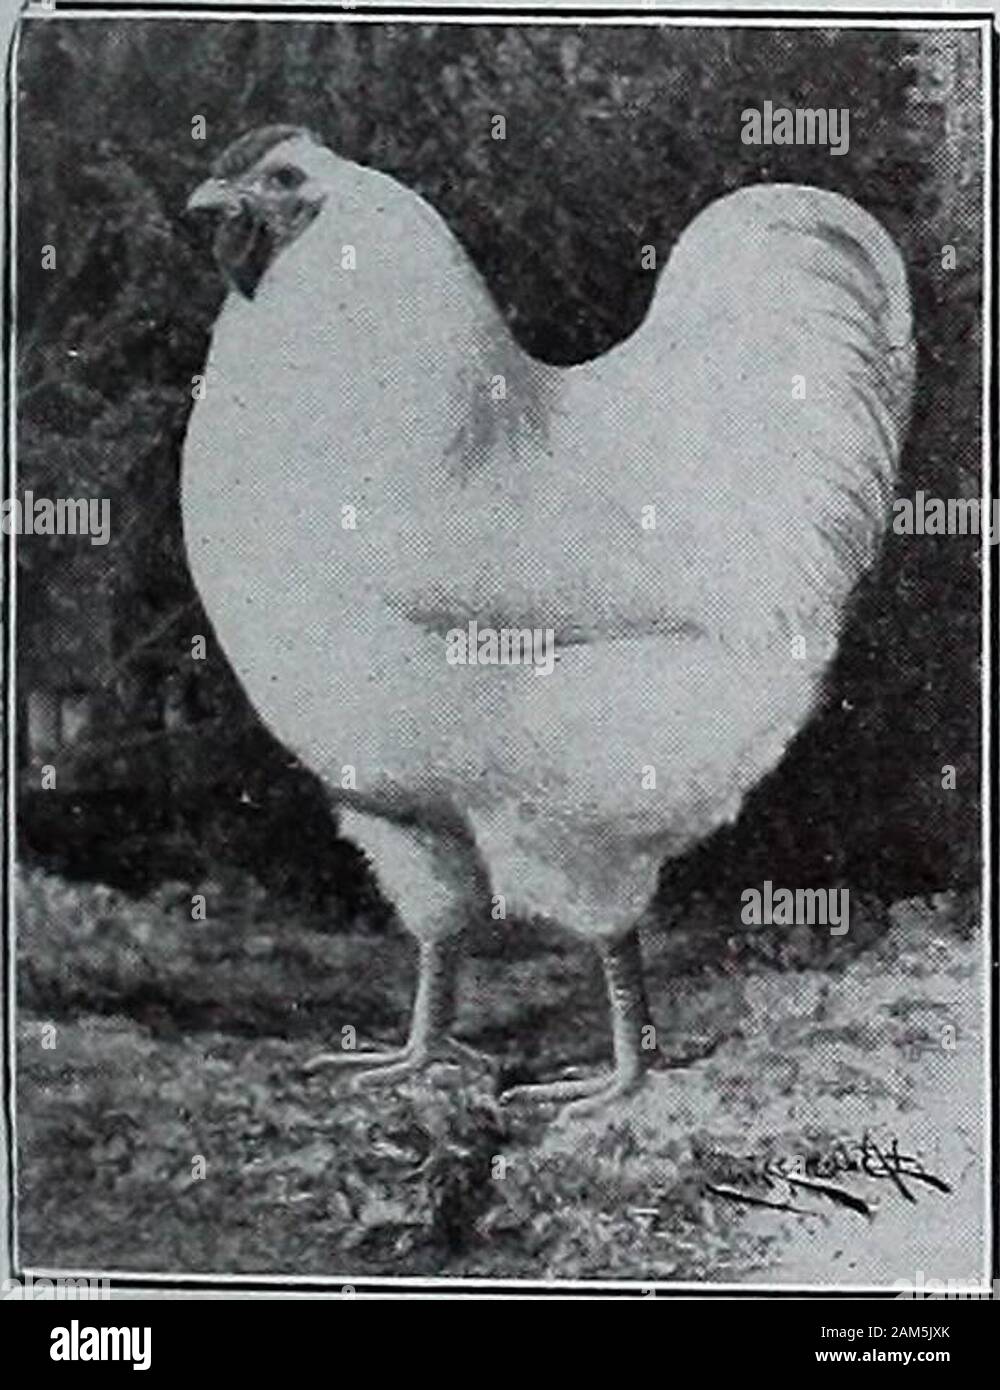 Poultry fancier . action guaranteed. A few pens Whites for ® 3 sale at $25 and 30 good Buff Pullets at $1.50 each. ® Langhorne Poultry Farm, Edw. Ambler. Prop., Langhorne. Pa.9 ®r®®®®®®®®®®»®®®®®®®®®®®®®®®®®®®®®®®®®®®®®*®®®®®®®®®*®» HEELERS WHITE WYANDOTTES The strain that has produced the winners at Ameri-cas largest and best shows for the past 18 years.They have that perfection of type combined with thatpurity of color so necessary to win The Worlds Greatest Strain EGGS. EGGS. $5.00 per 15; $9.00 per 30; $14.00per 50; $25.00 per 100. Special mated yards, $10.00,$15.00 and $20.00 per 15. Redu Stock Photo